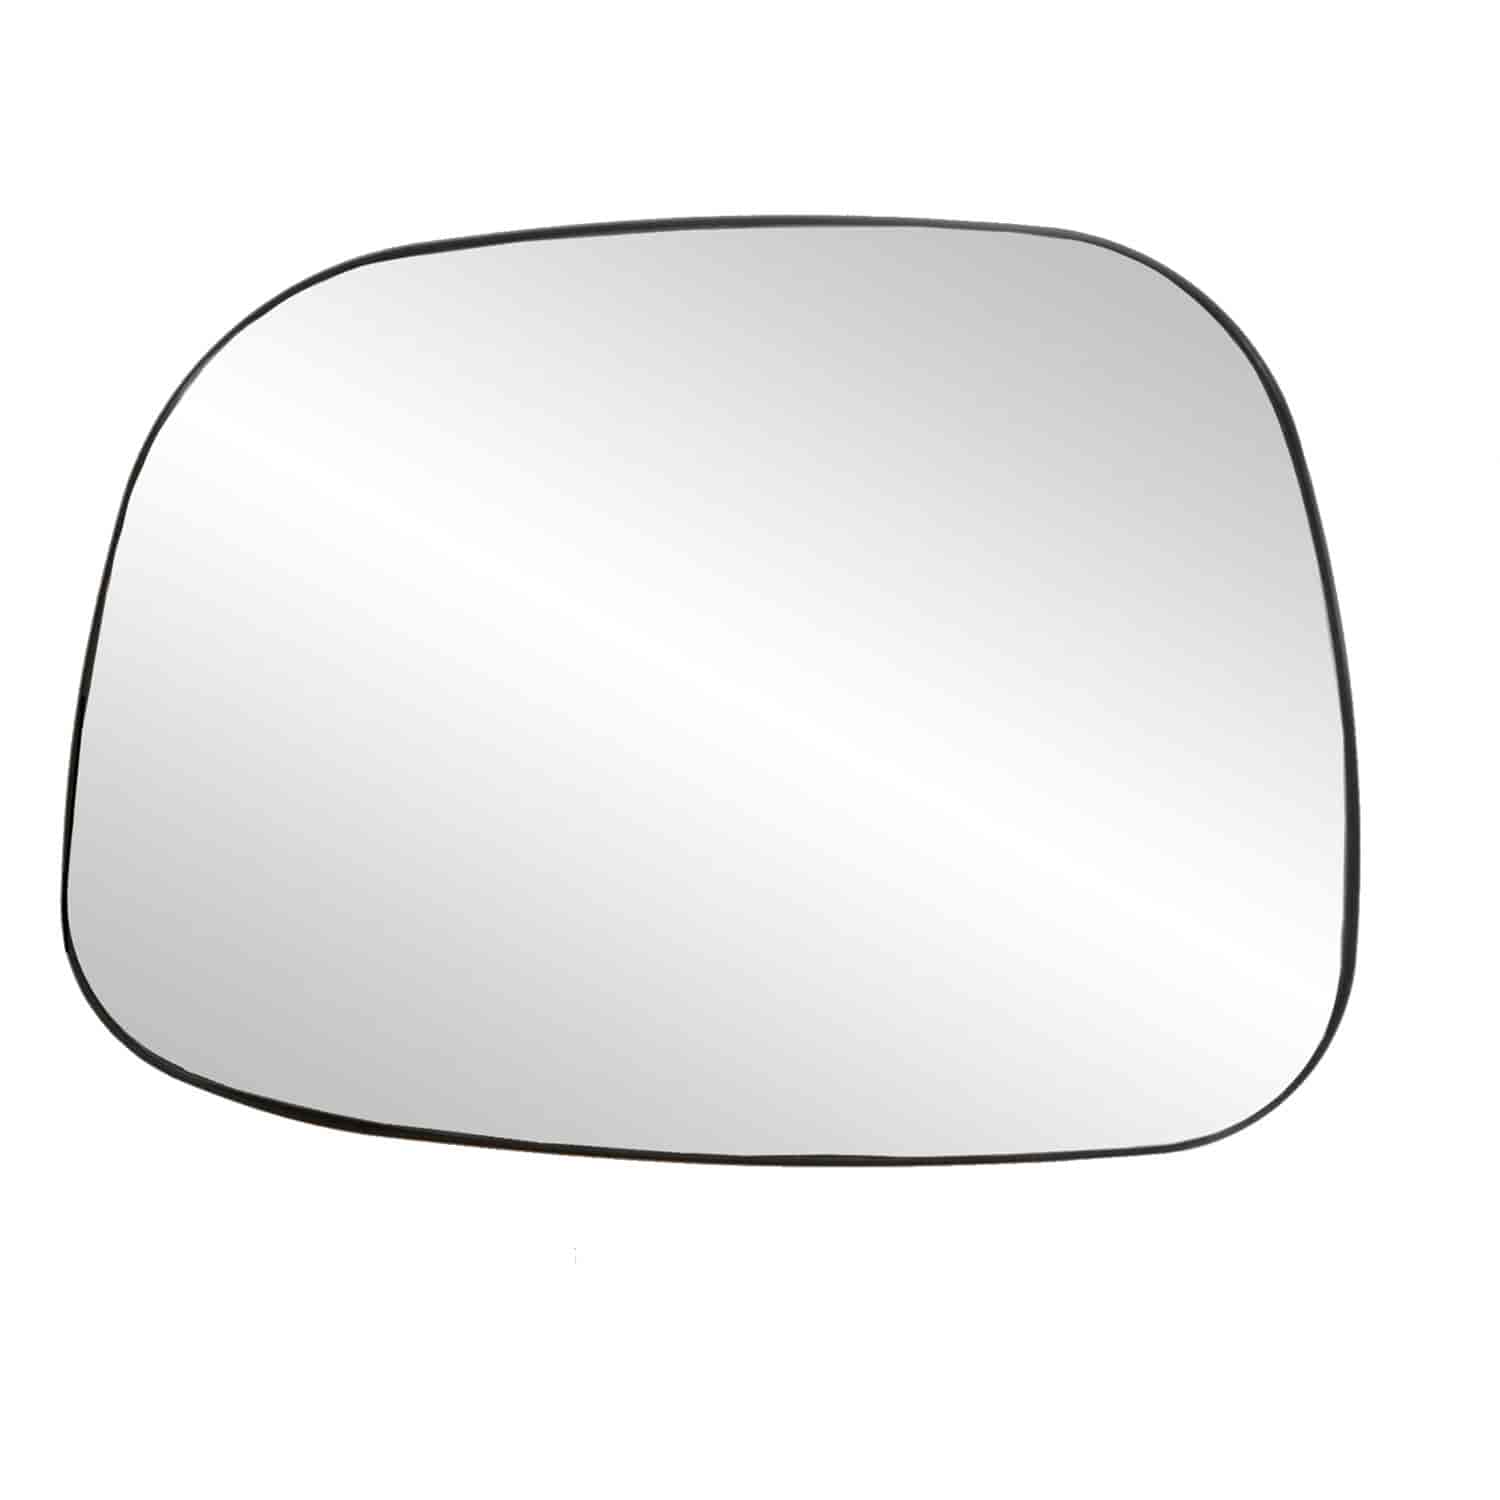 Replacement Glass Assembly for 02-07 Rendezvous replace your cracked or broken driver side mirror gl